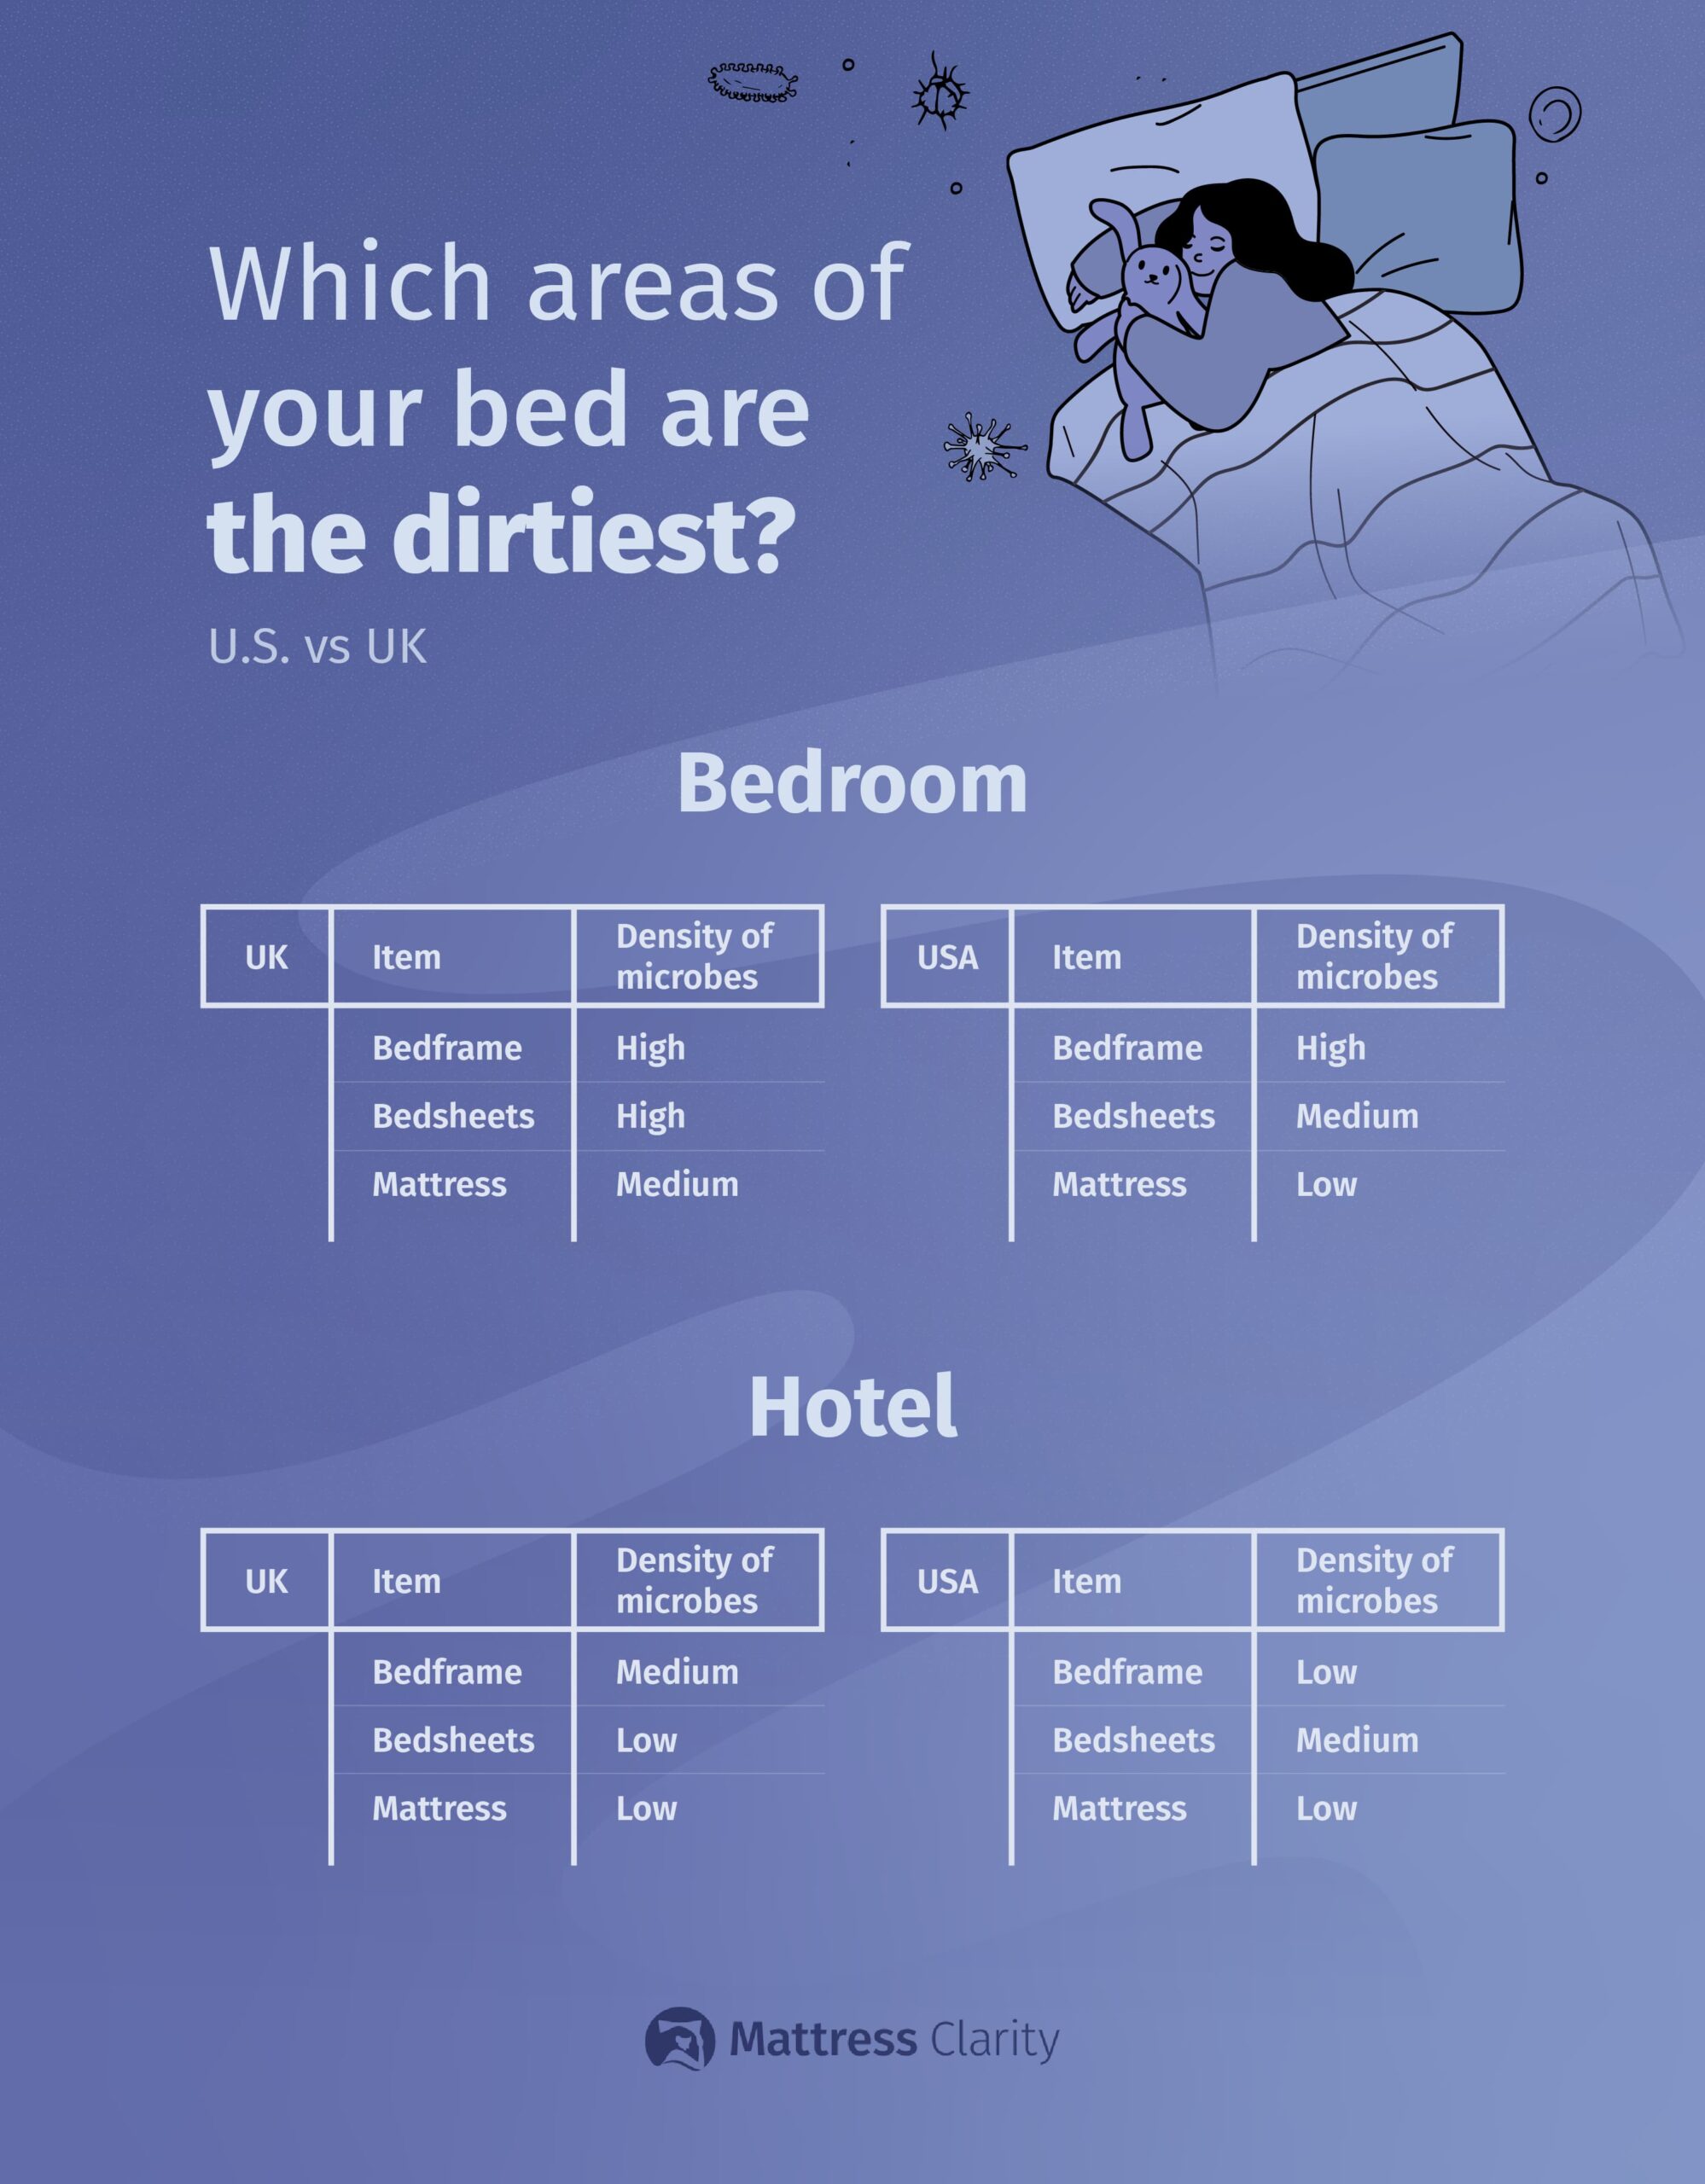 Chart graphic ranking the areas of bedrooms and hotels with the most bacteria in both the U.S. and UK.